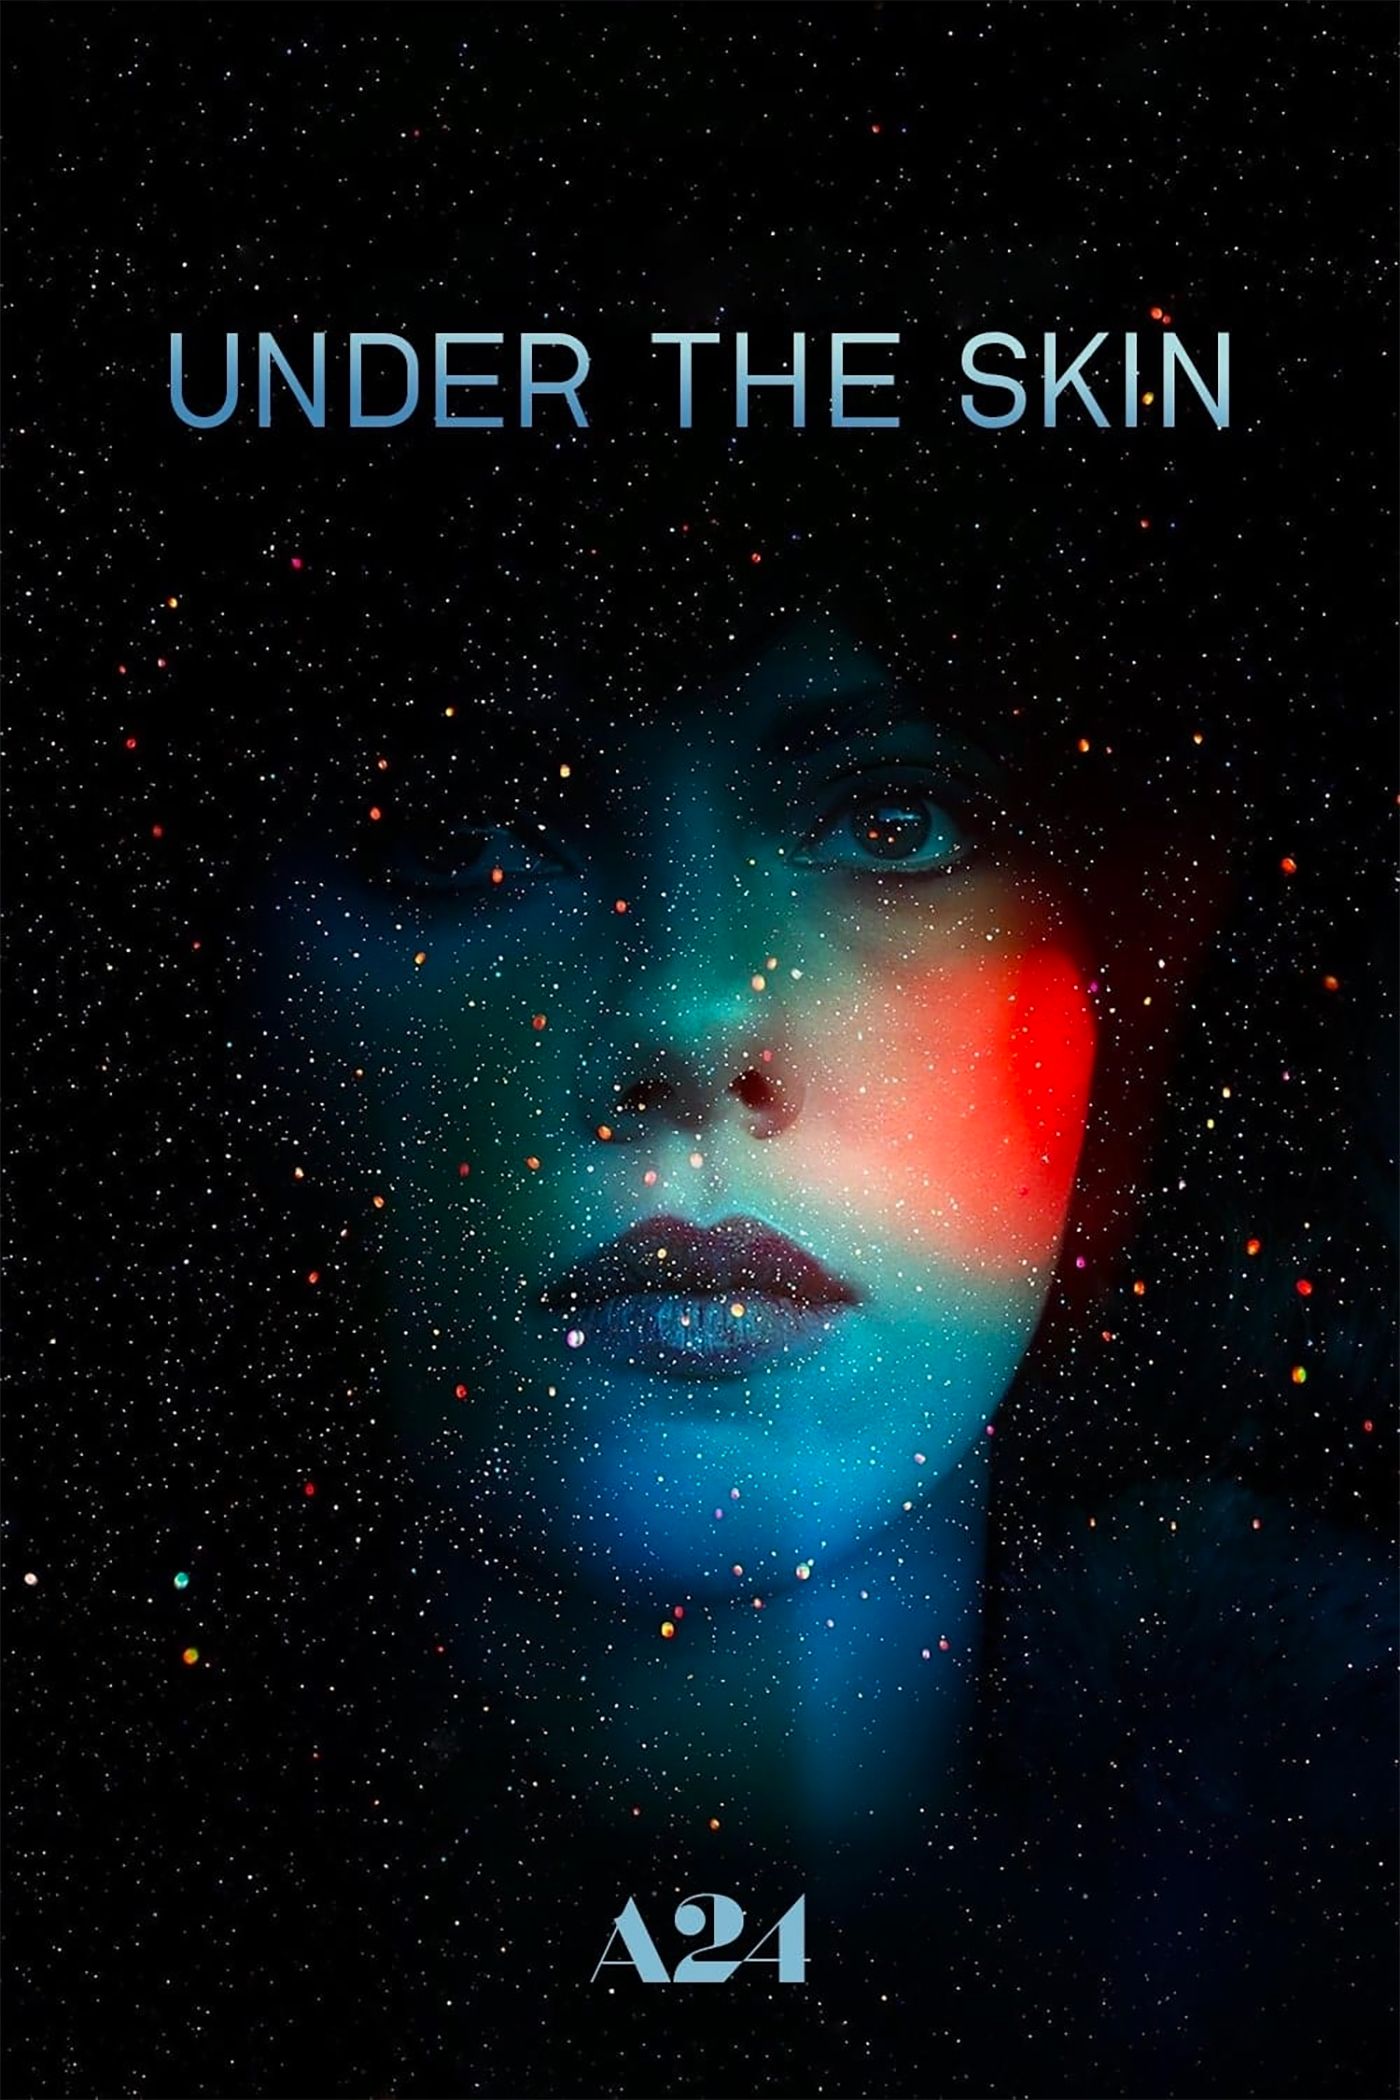 Scarlett Johansson's face overlaid on a starry night in the Under the Skin poster